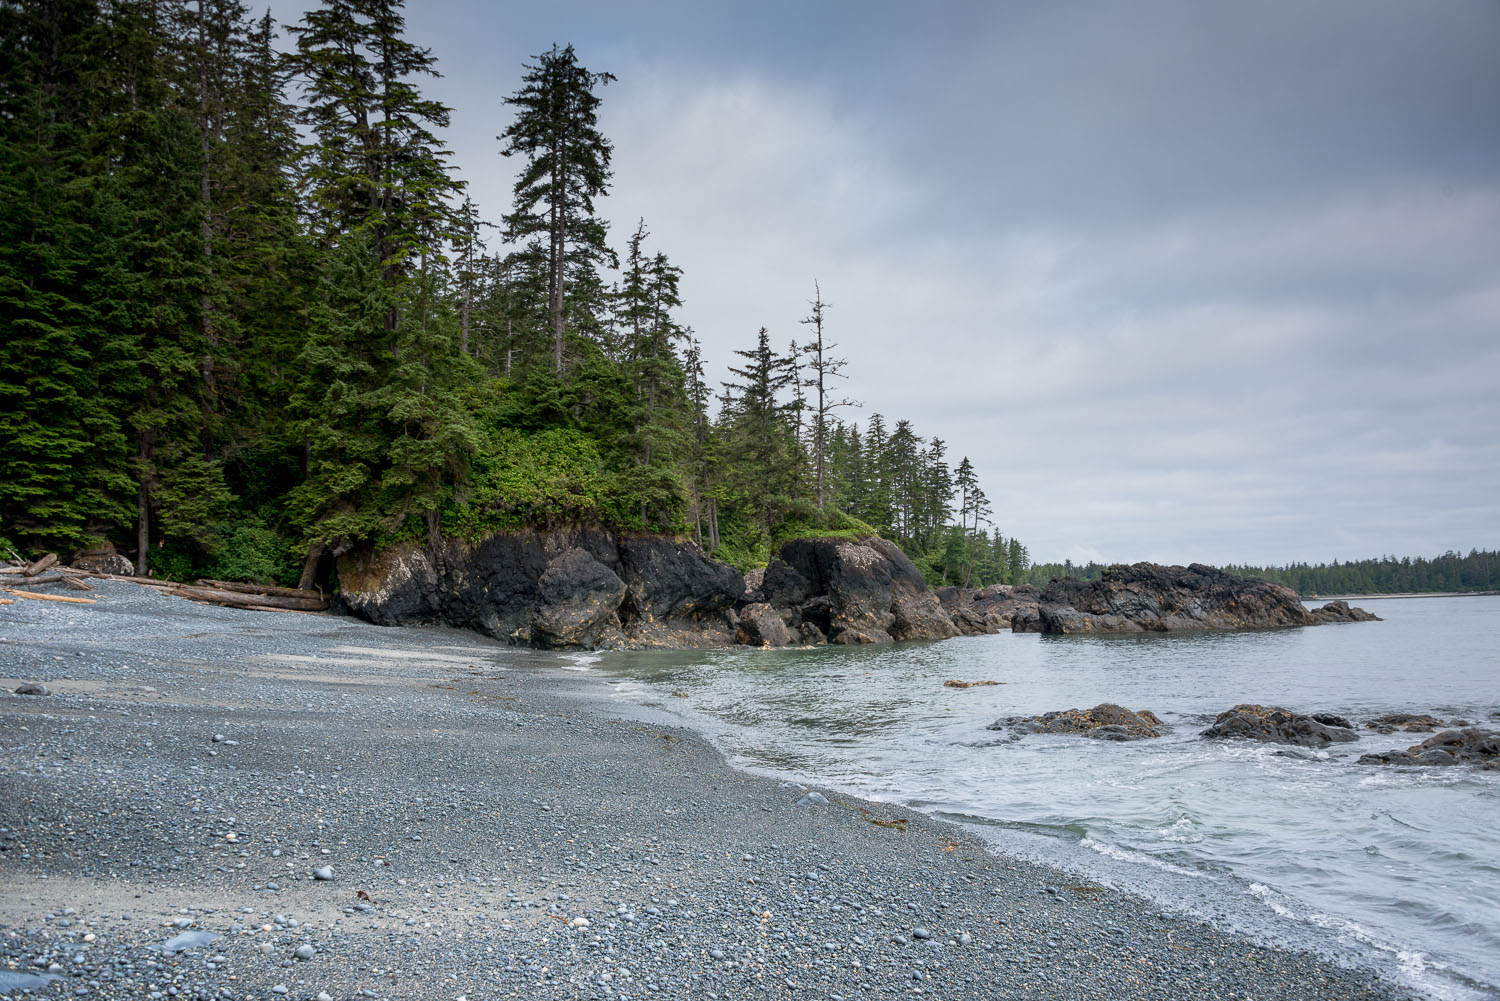 hiking and camping inside Cape Scott Provincial Park on Vancouver Island. This is on the North Coast Trail